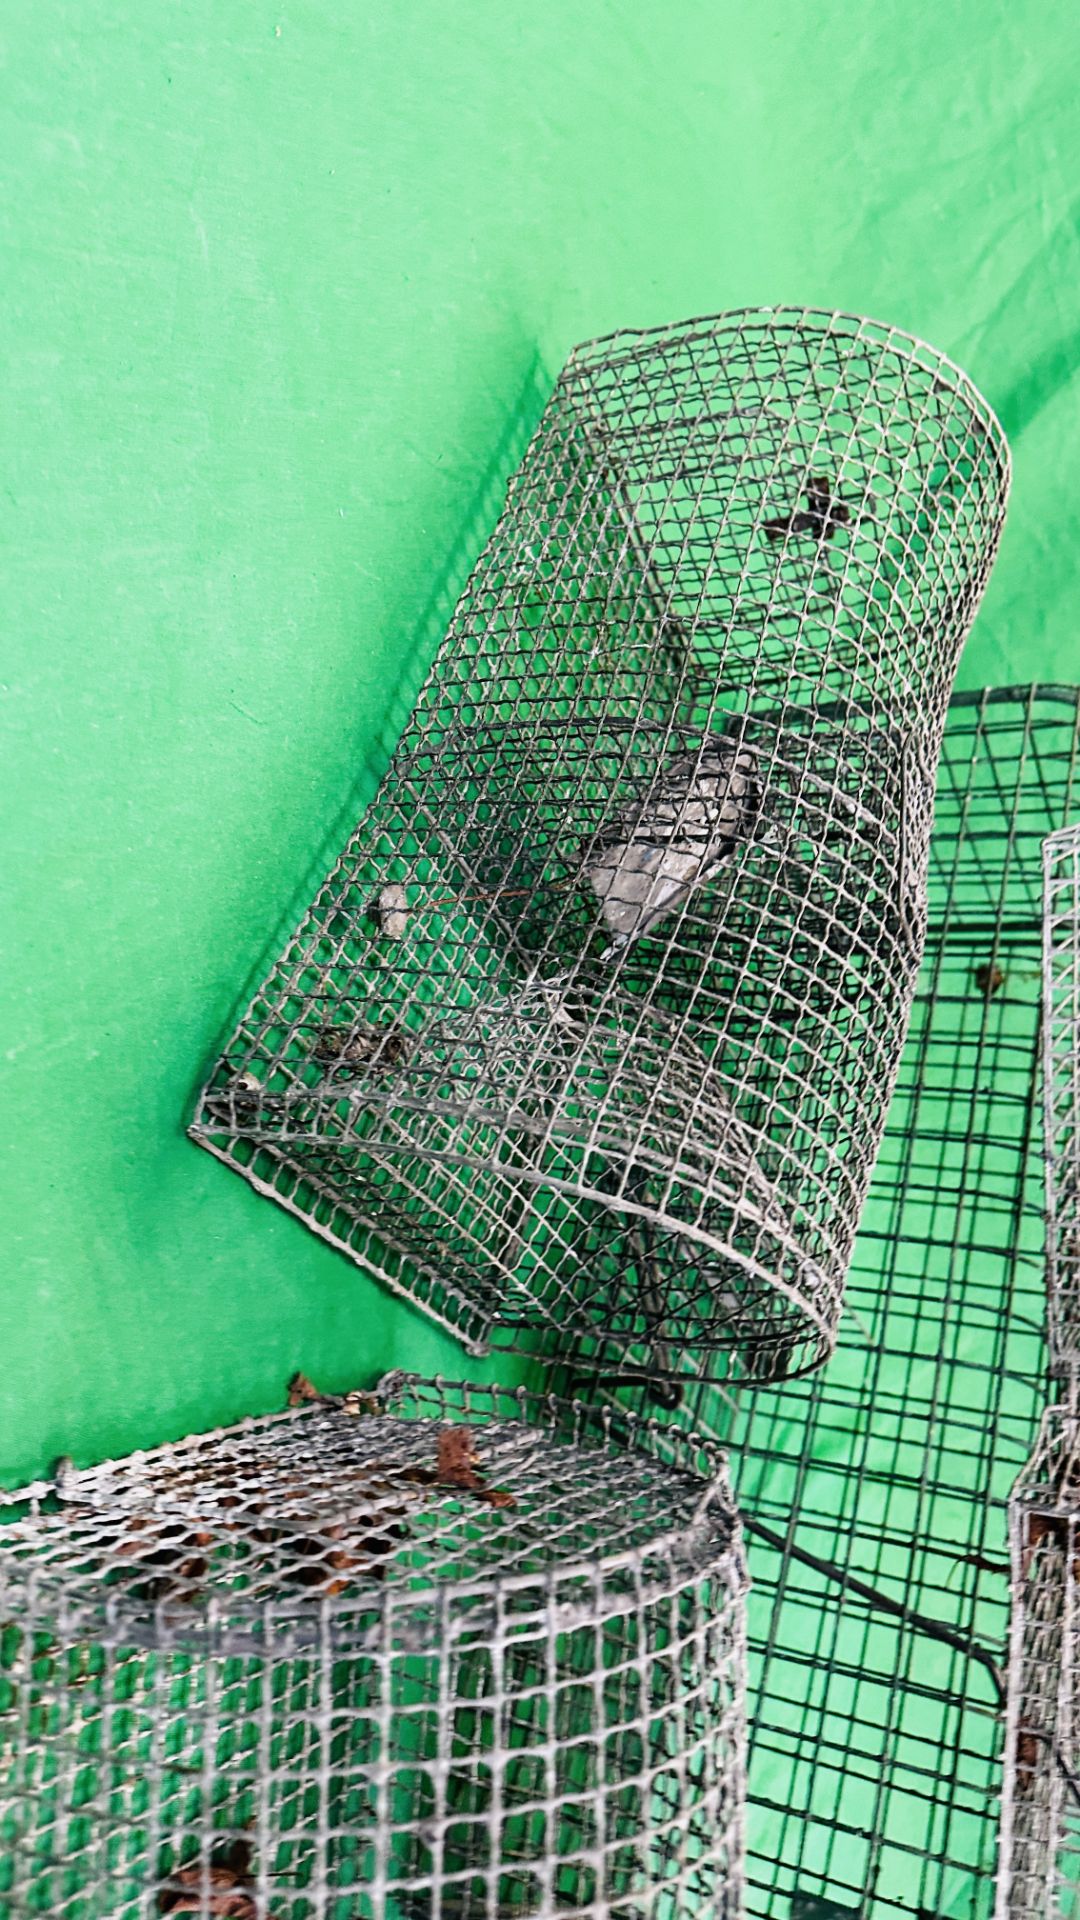 A GROUP OF FIVE HUMANE TRAPS - Image 6 of 8